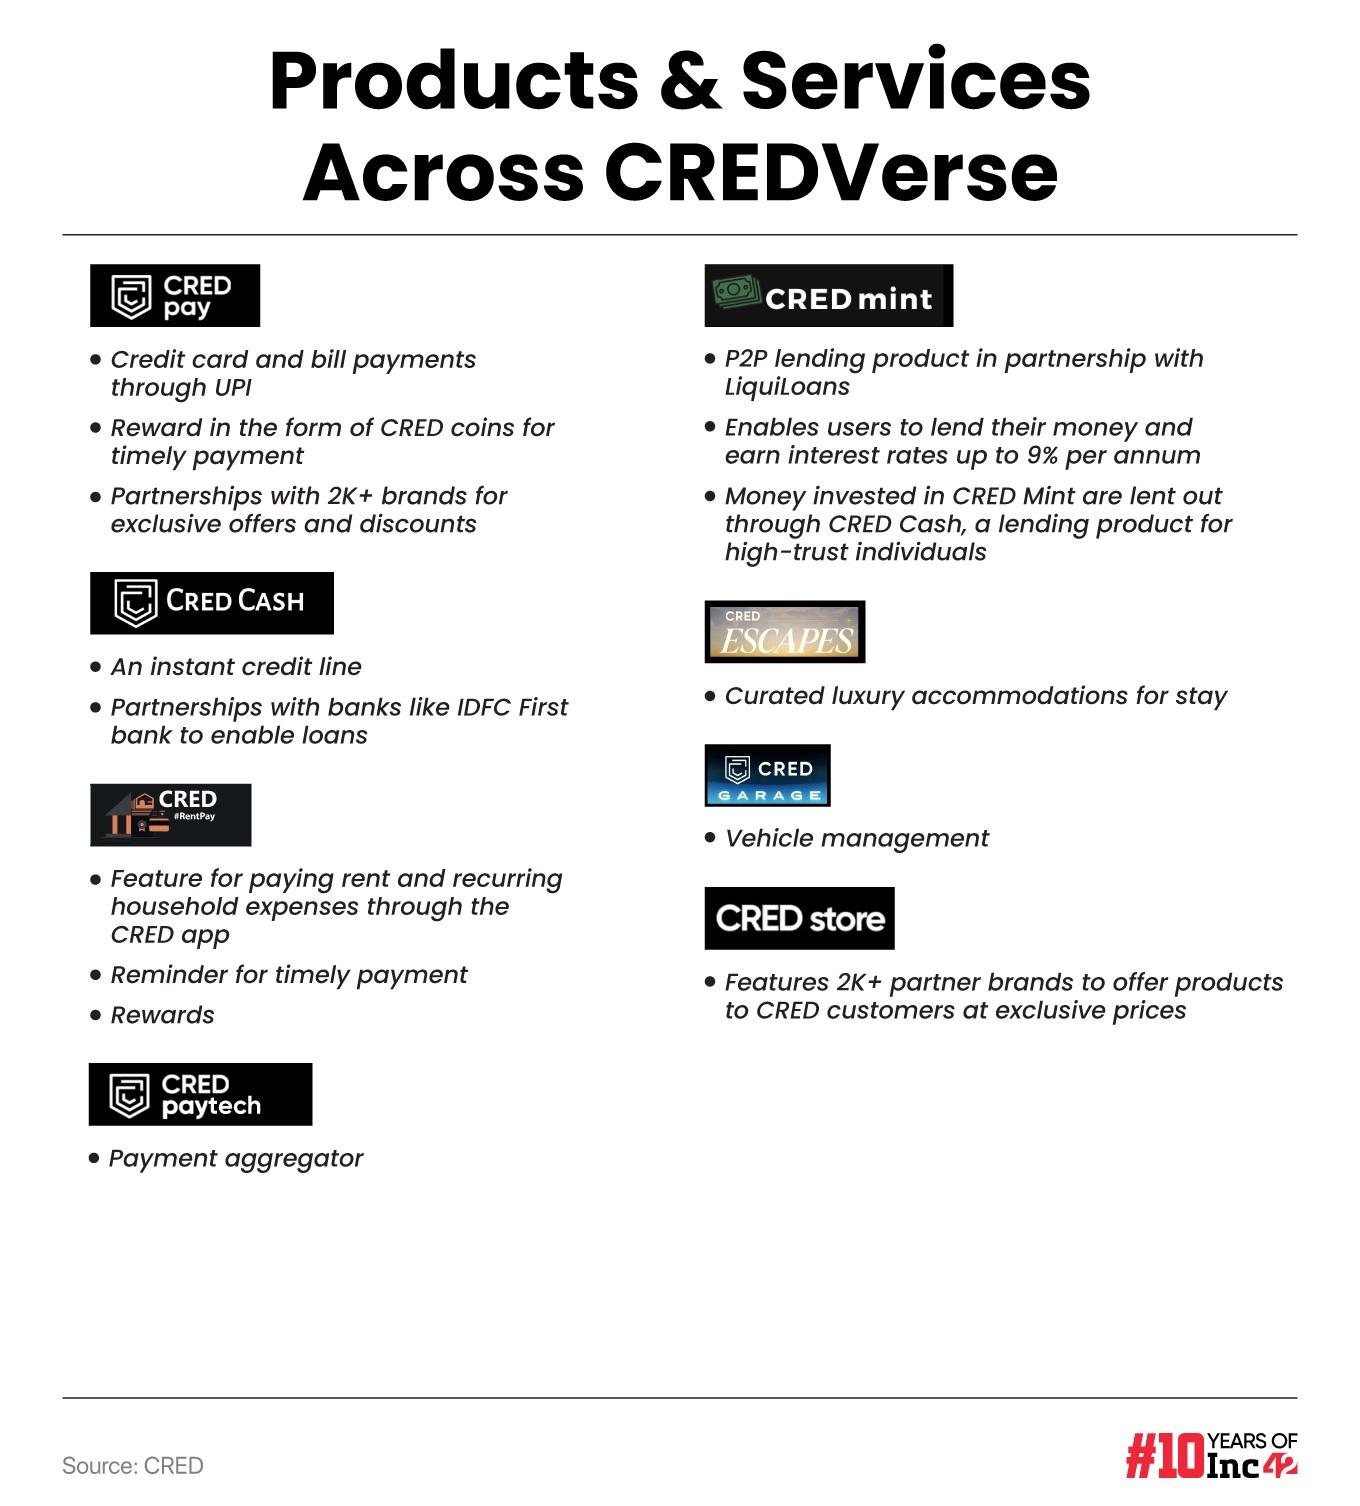 cred products